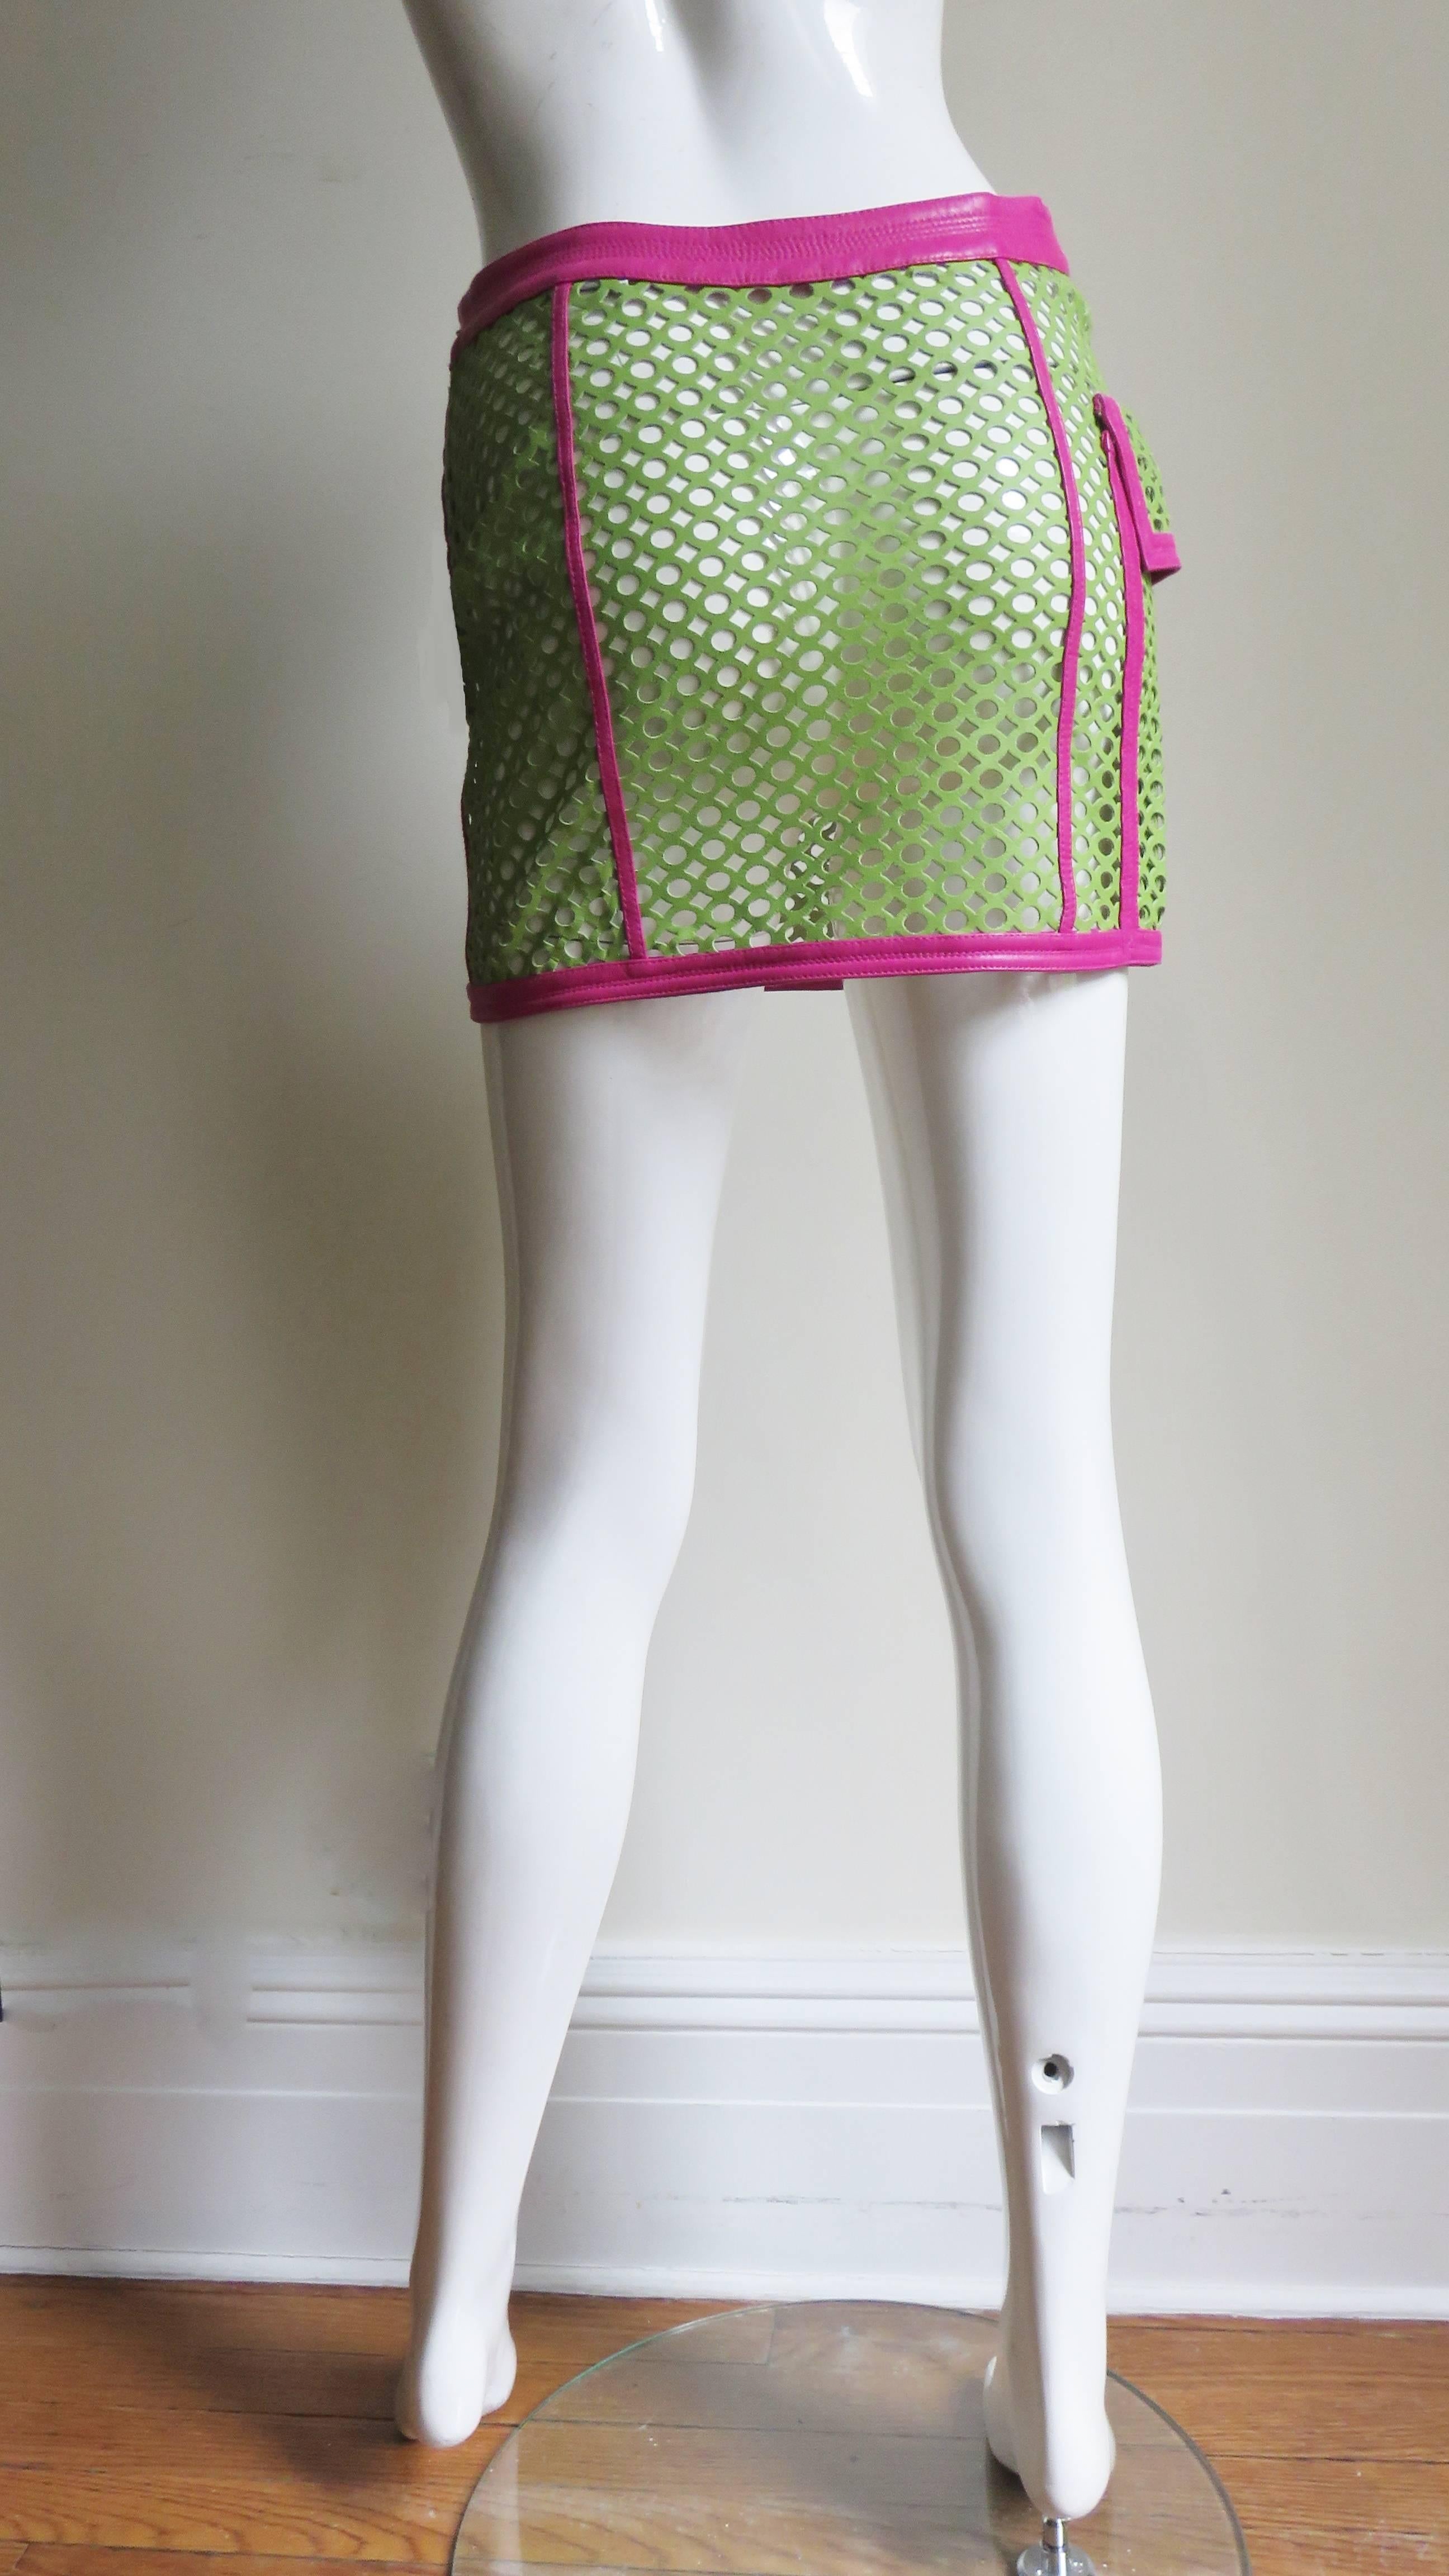  Gianni Versace New Perforated Leather Color Block Mini Skirt 1990s For Sale 3